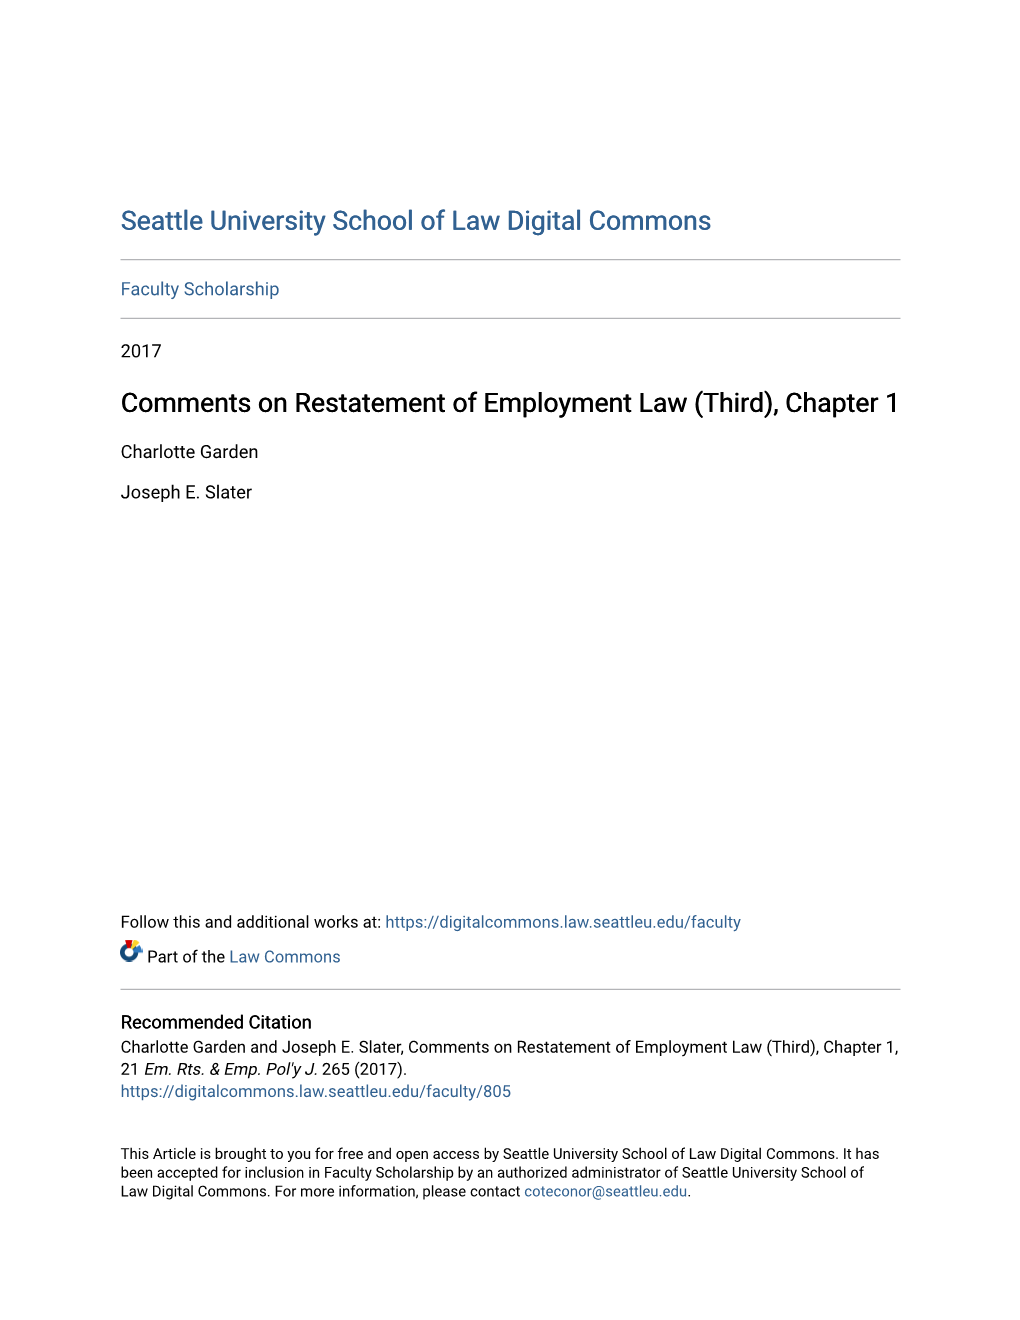 Comments on Restatement of Employment Law (Third), Chapter 1